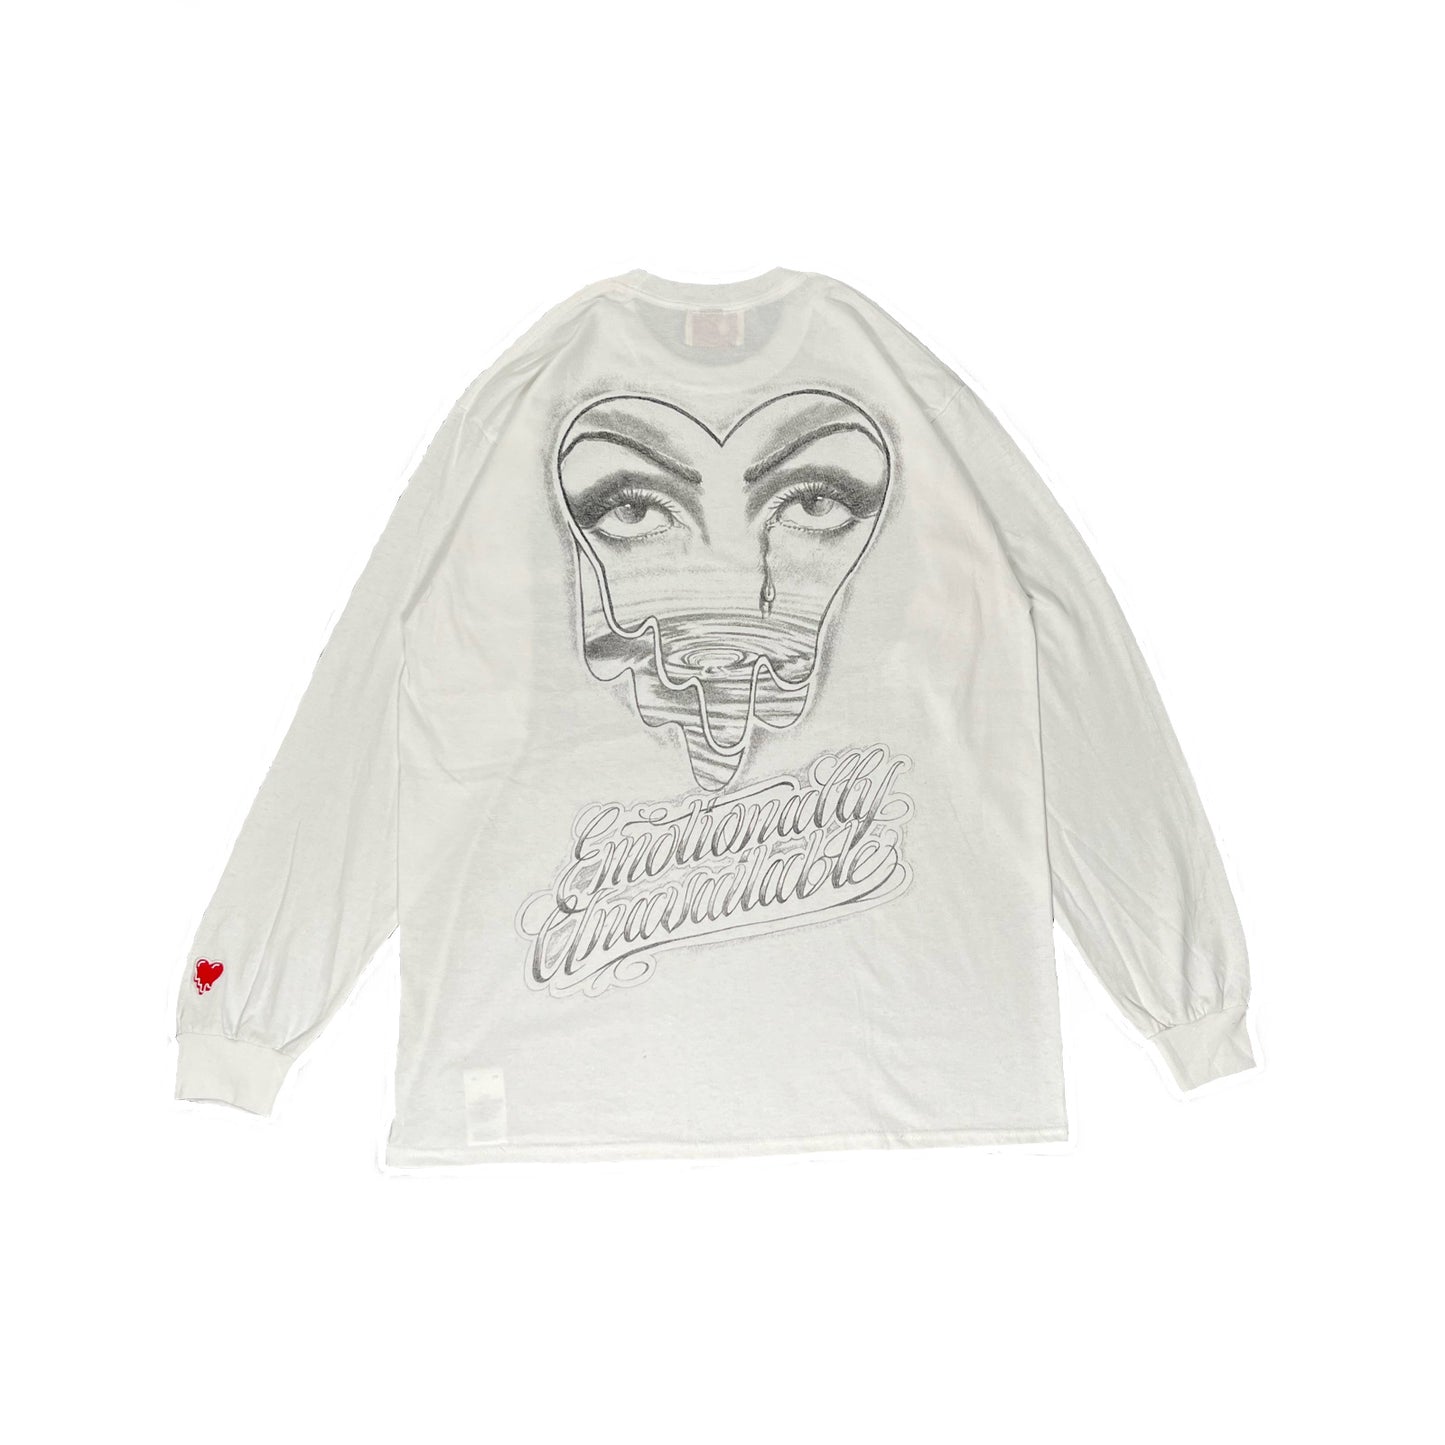 【EMOTIONALLY UNAVAILABLE】＜GENDERLESS＞【23AW】PENCIL DRAWING LS TEE